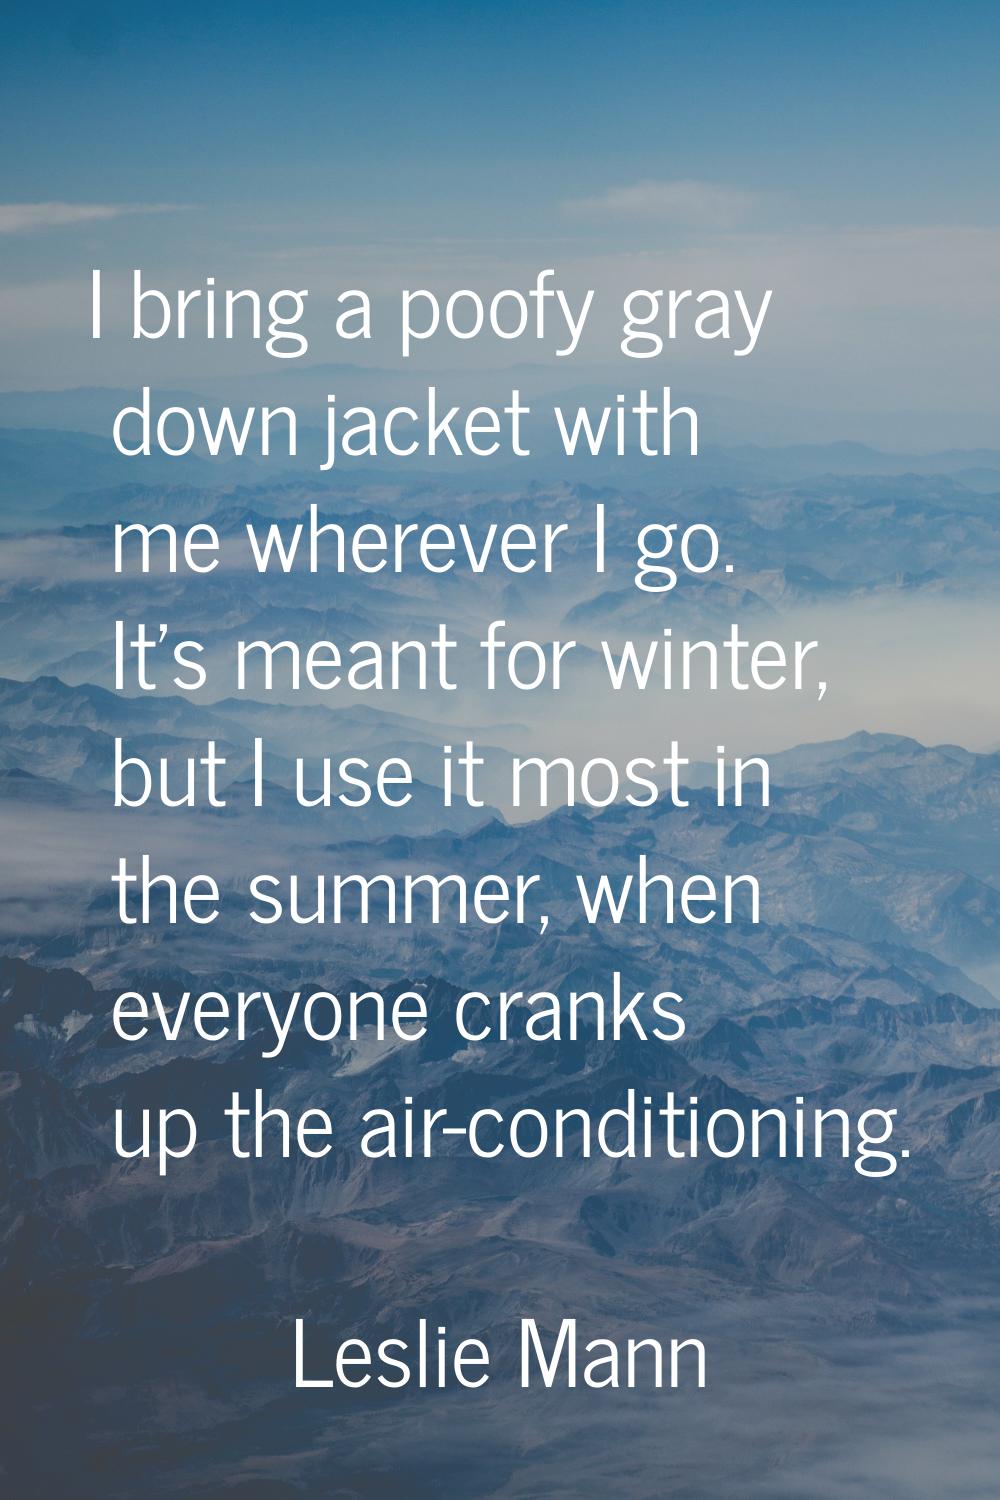 I bring a poofy gray down jacket with me wherever I go. It's meant for winter, but I use it most in